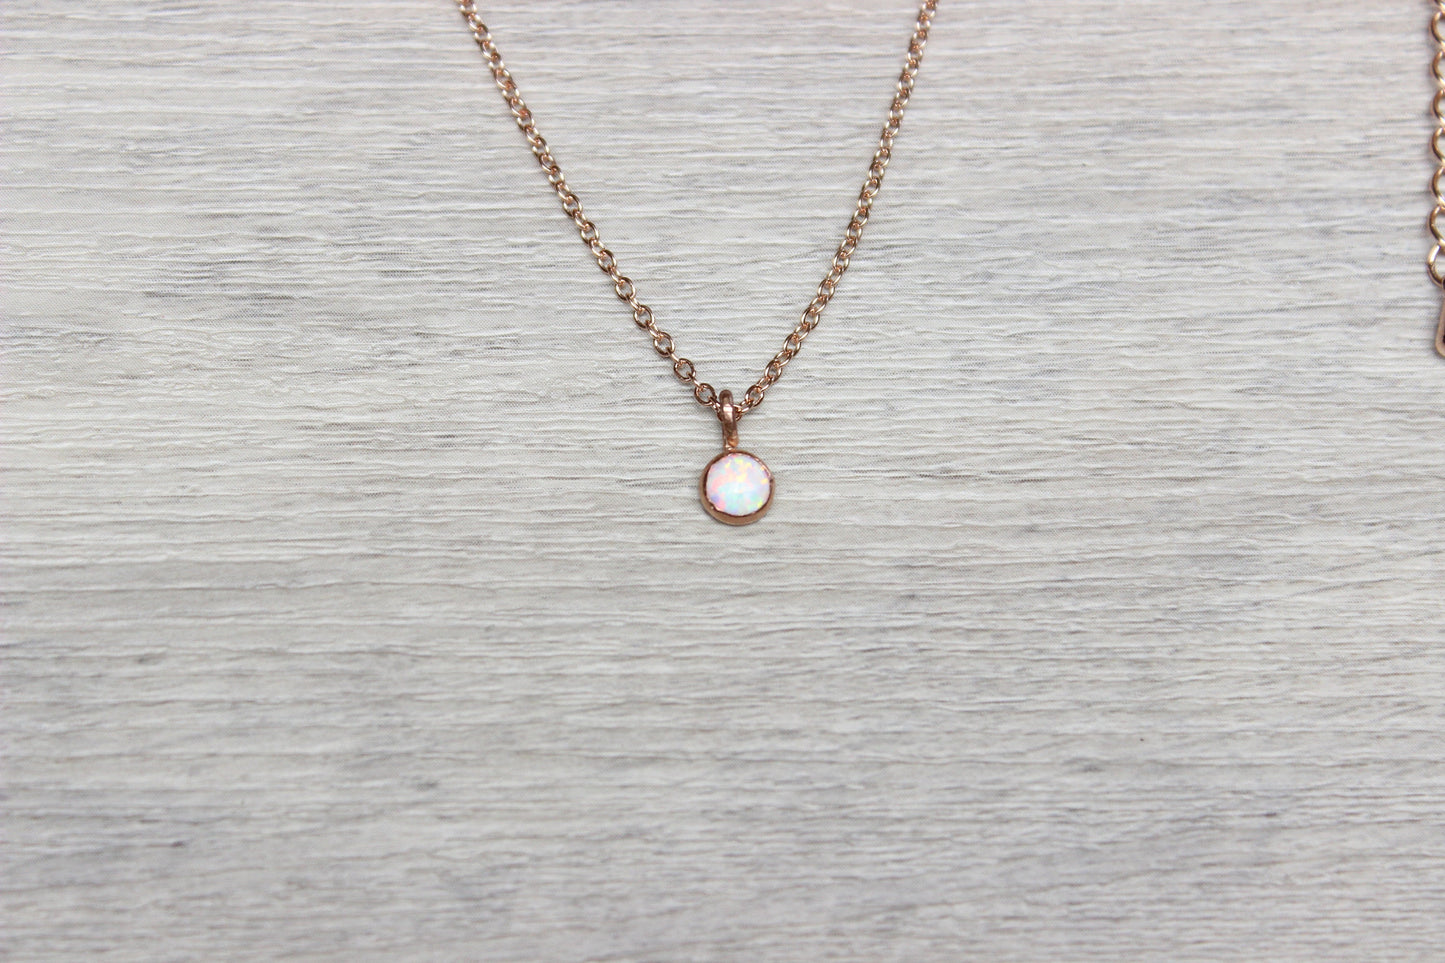 Rose Gold Opal Necklace // White Opal Necklace //  Bridesmaids Gift // October Birthstone Necklace // Rose Gold Gemstone Necklace